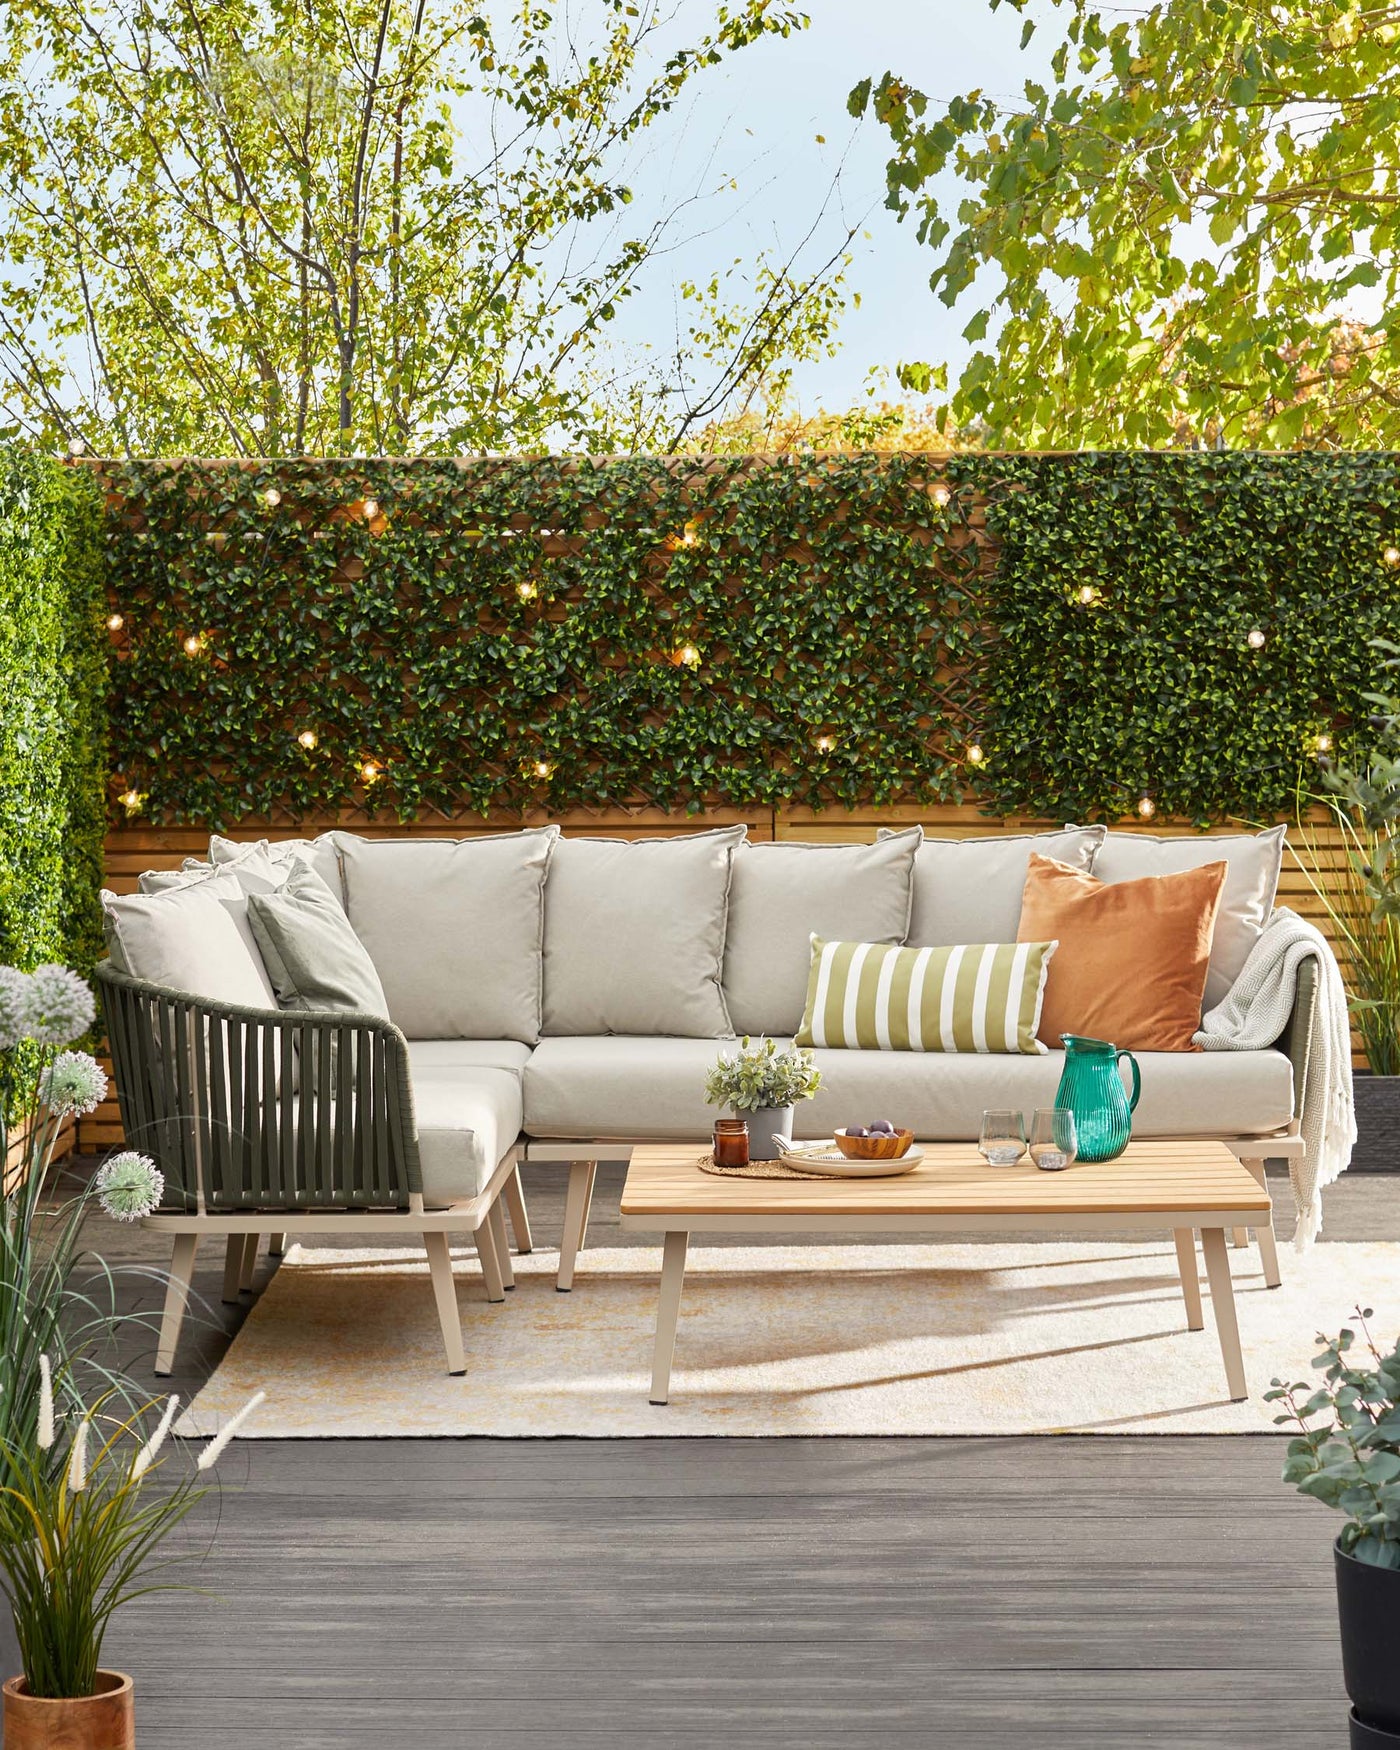 Outdoor furniture set featuring a modern beige upholstered sectional sofa with light grey and accent pillows, a matching wooden armchair with slatted design, and a low-profile rectangular wooden coffee table. The set is arranged on an outdoor rug in a cosy patio setting surrounded by lush greenery and hanging string lights.